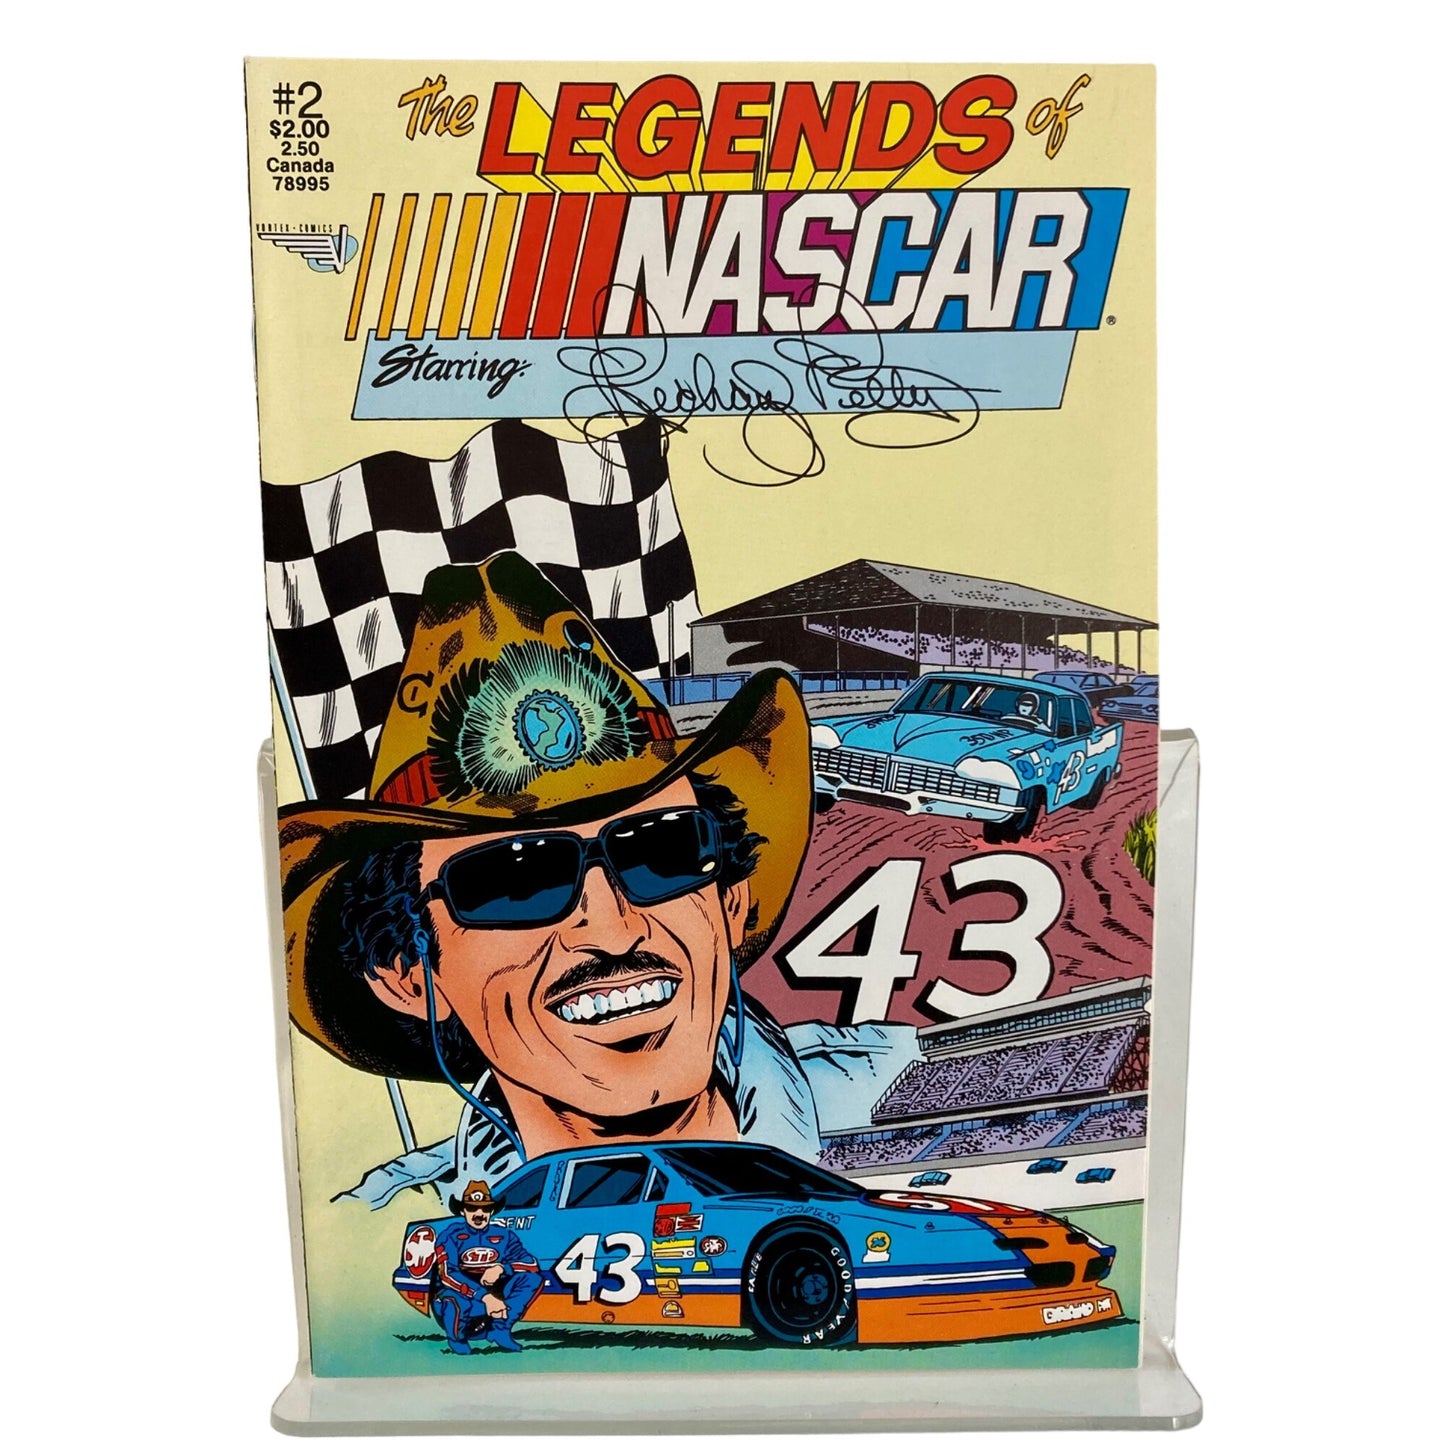 Vintage The Legends of NASCAR Richard Petty #43 Comic Book Issue #2 NEW!